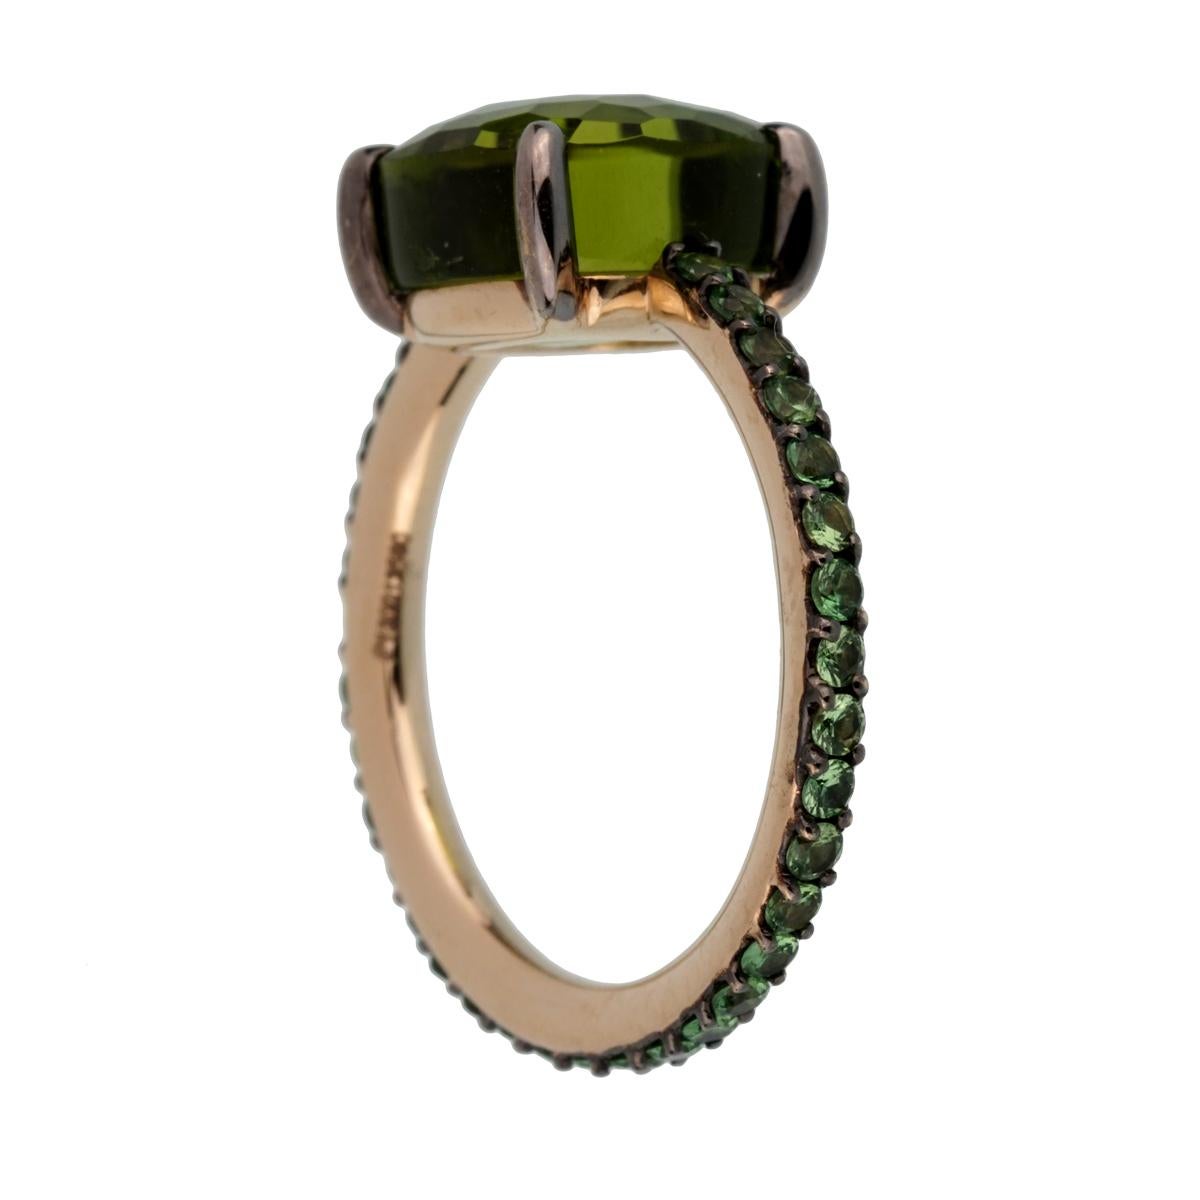 A fabulous brand new Pomellato cocktail ring showcasing a 3.56ct Peridot surrounded by .61ct of brilliant round tsavorite garnets set in 18k white gold. The ring size is 6.5

Pomellato Retail Price: $10,500
Sku:2446
